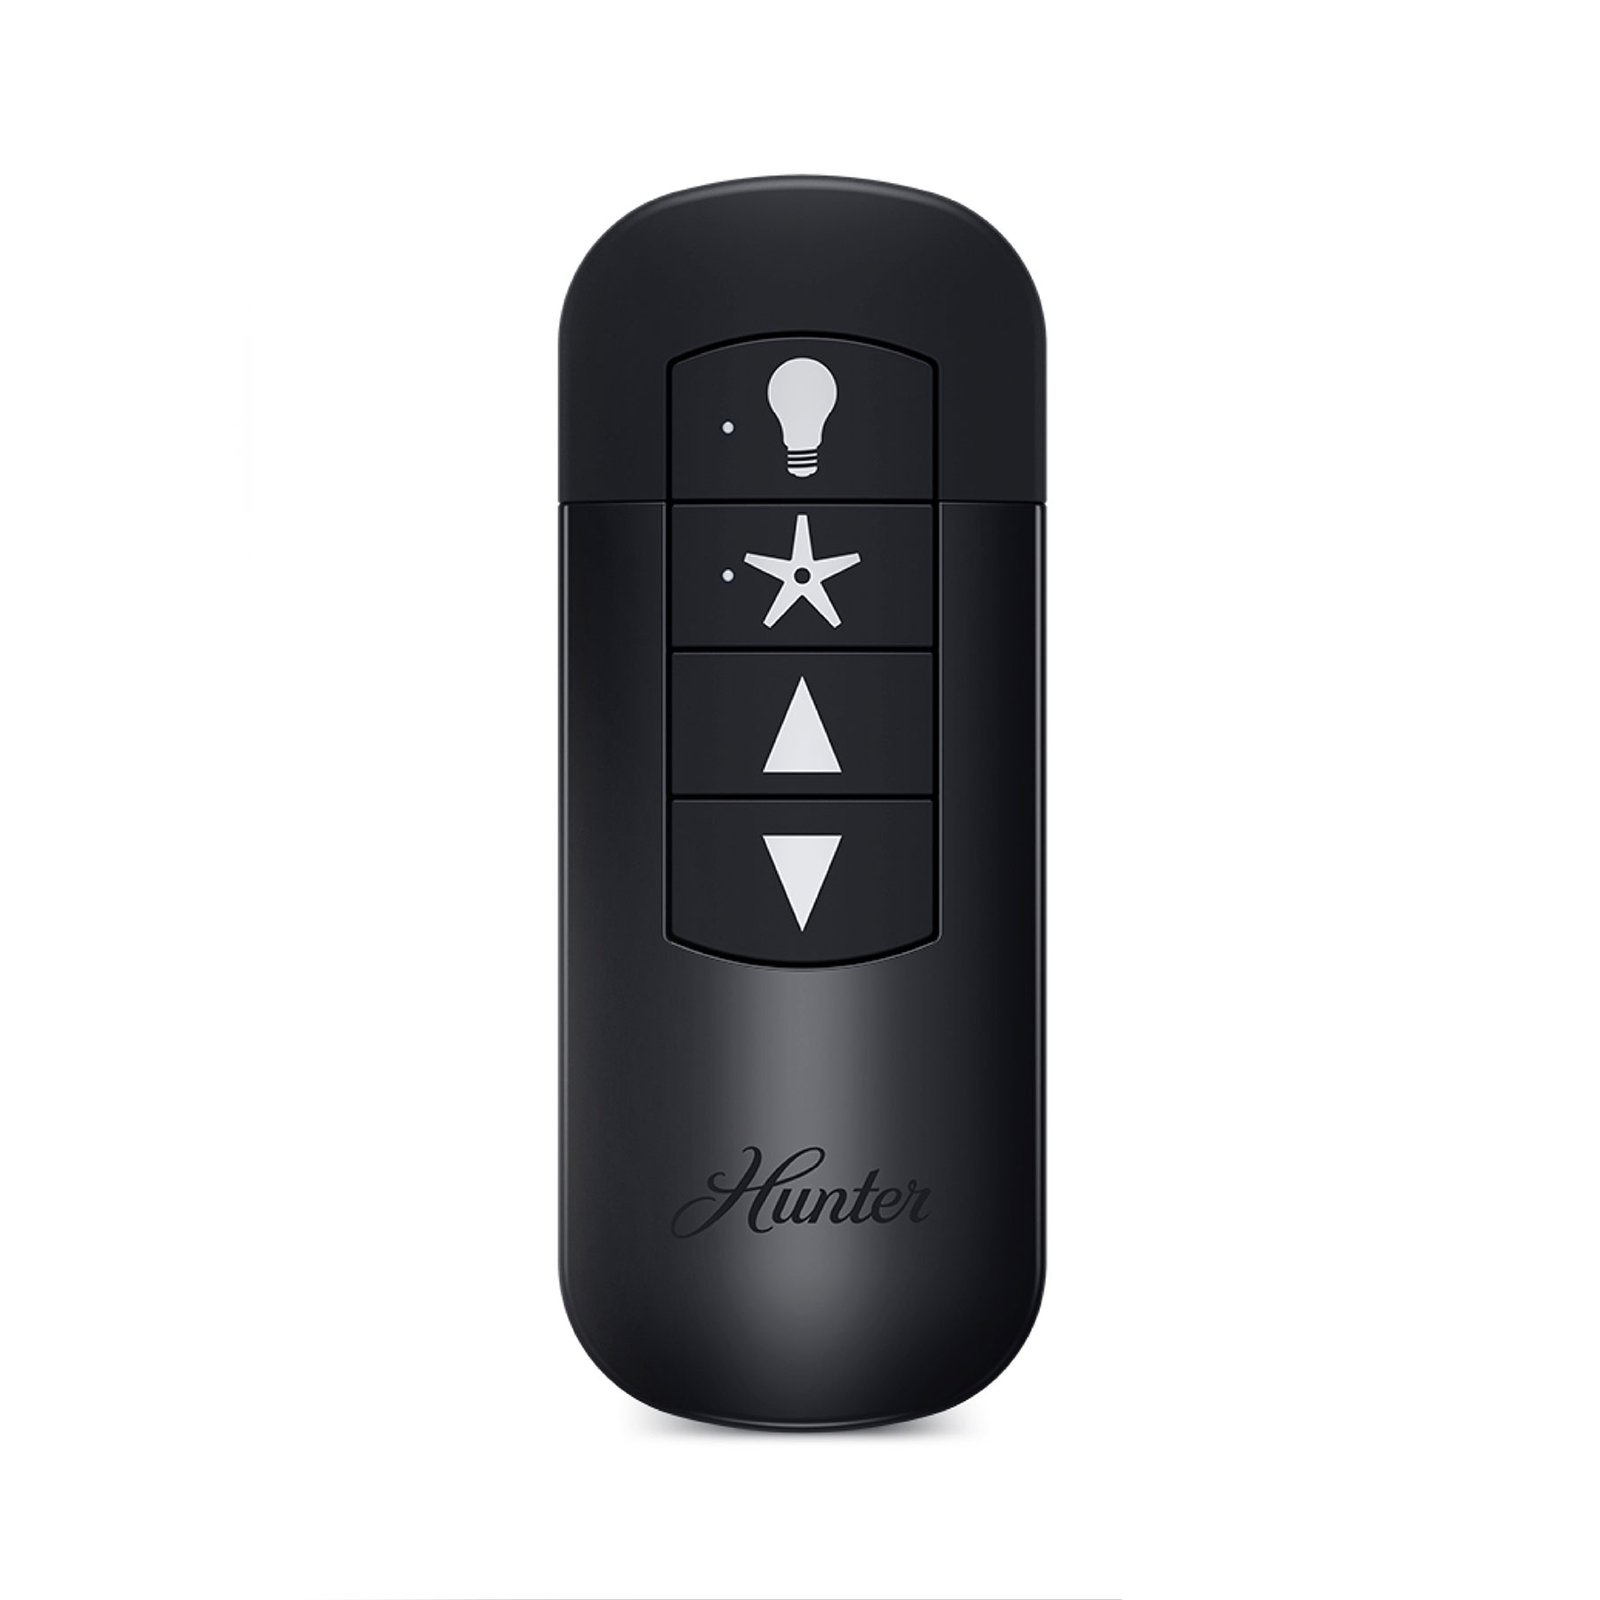 Remote control for Hunter ceiling fans